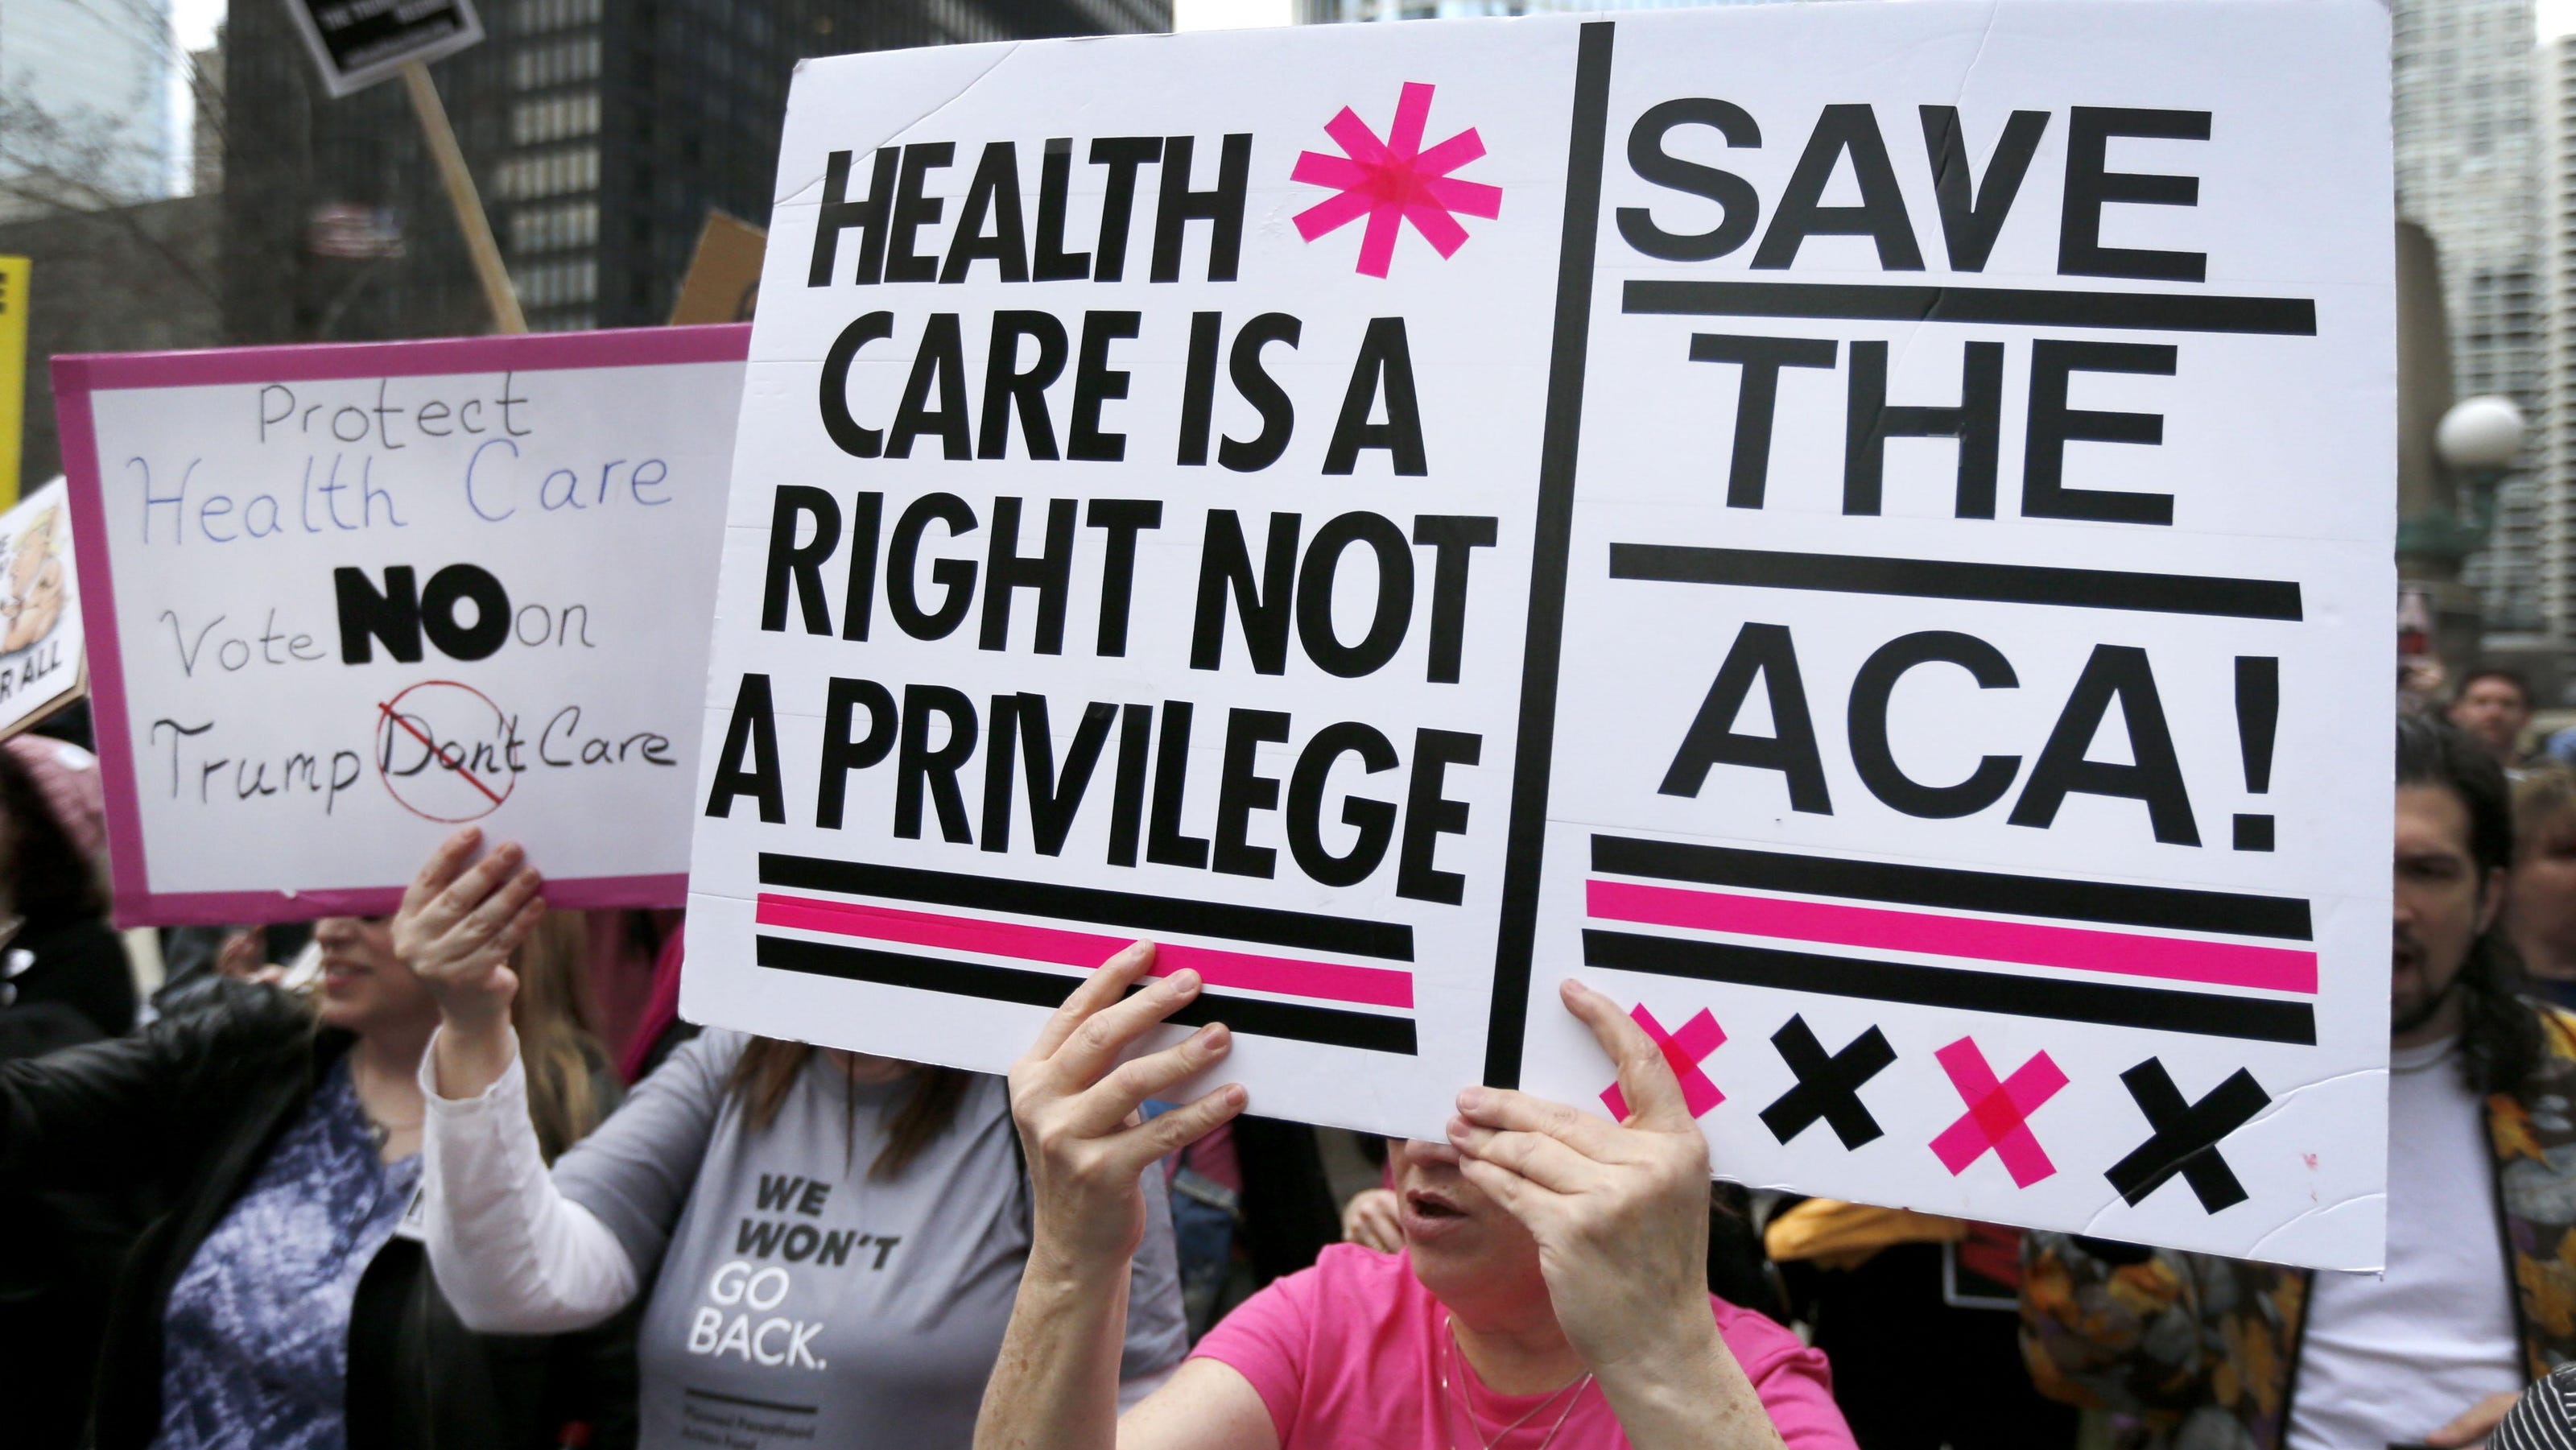 Eliminating the Affordable Care Act will be disastrous on many levels